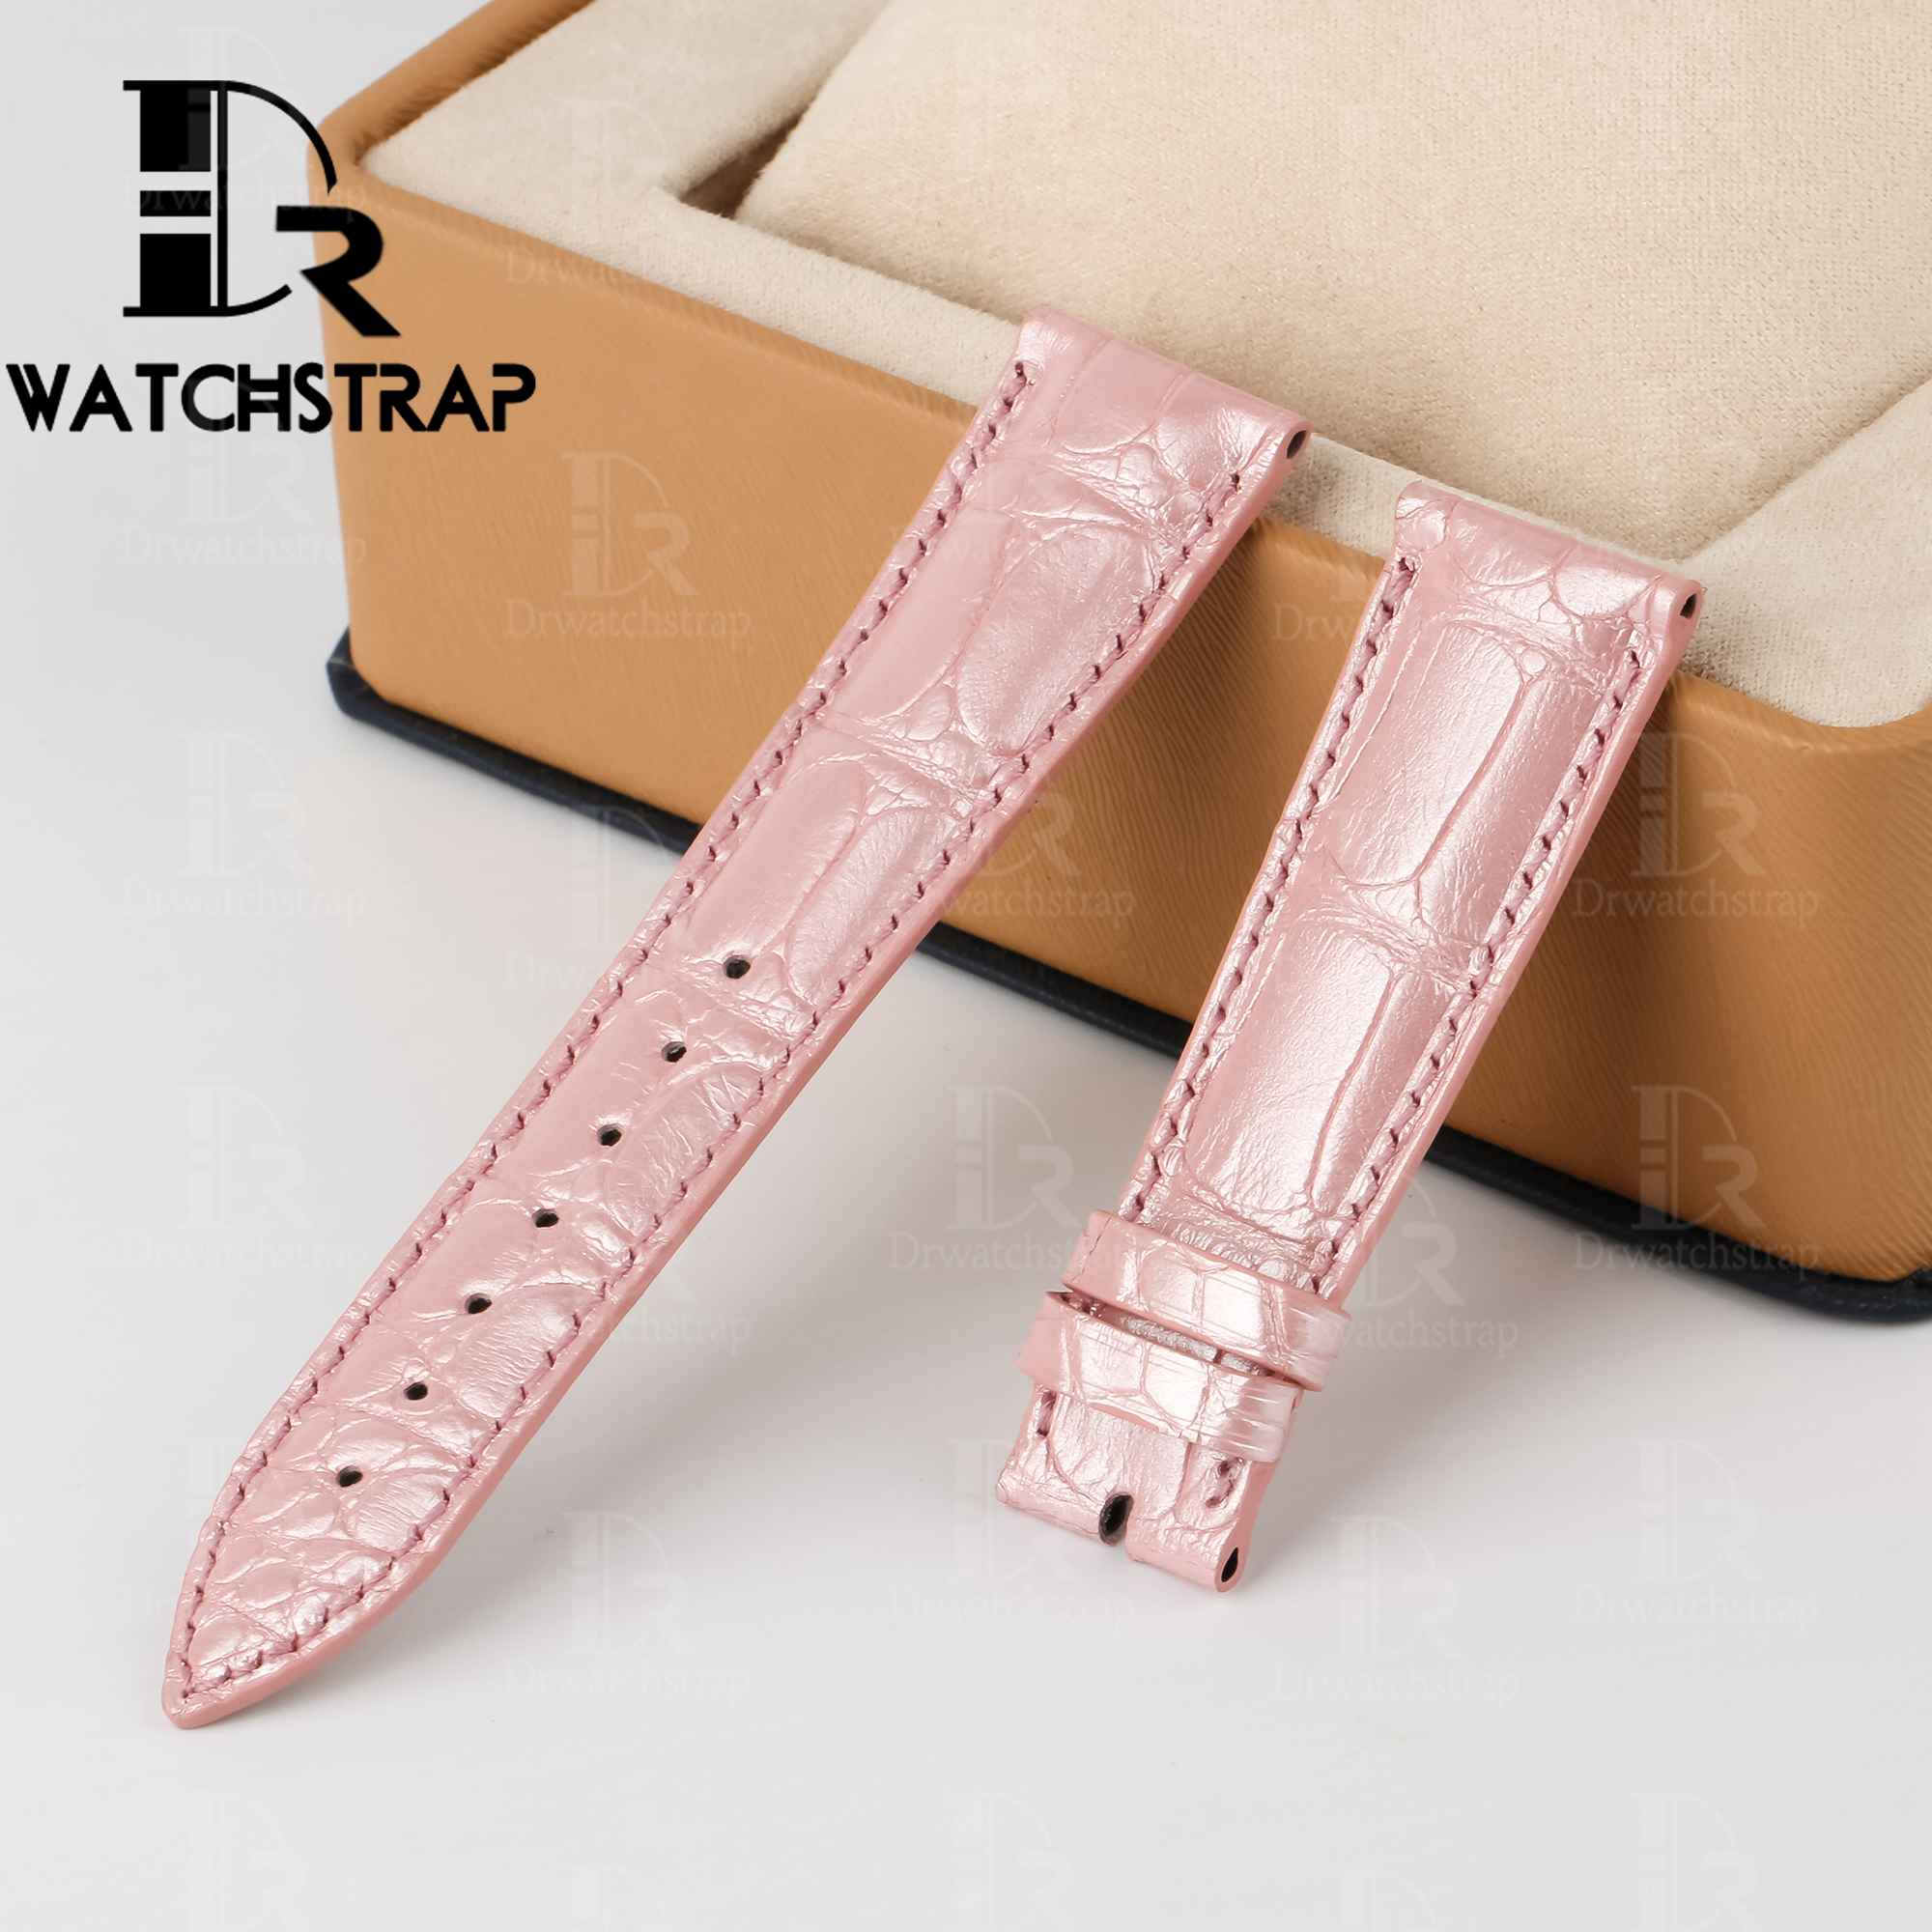 Best quality crocodile Pink America Alligator replacement Franck Muller leather strap and watch band for Franck Muller Casablanca 8880 luxury color dreams wristwatch - High-end watchbands online